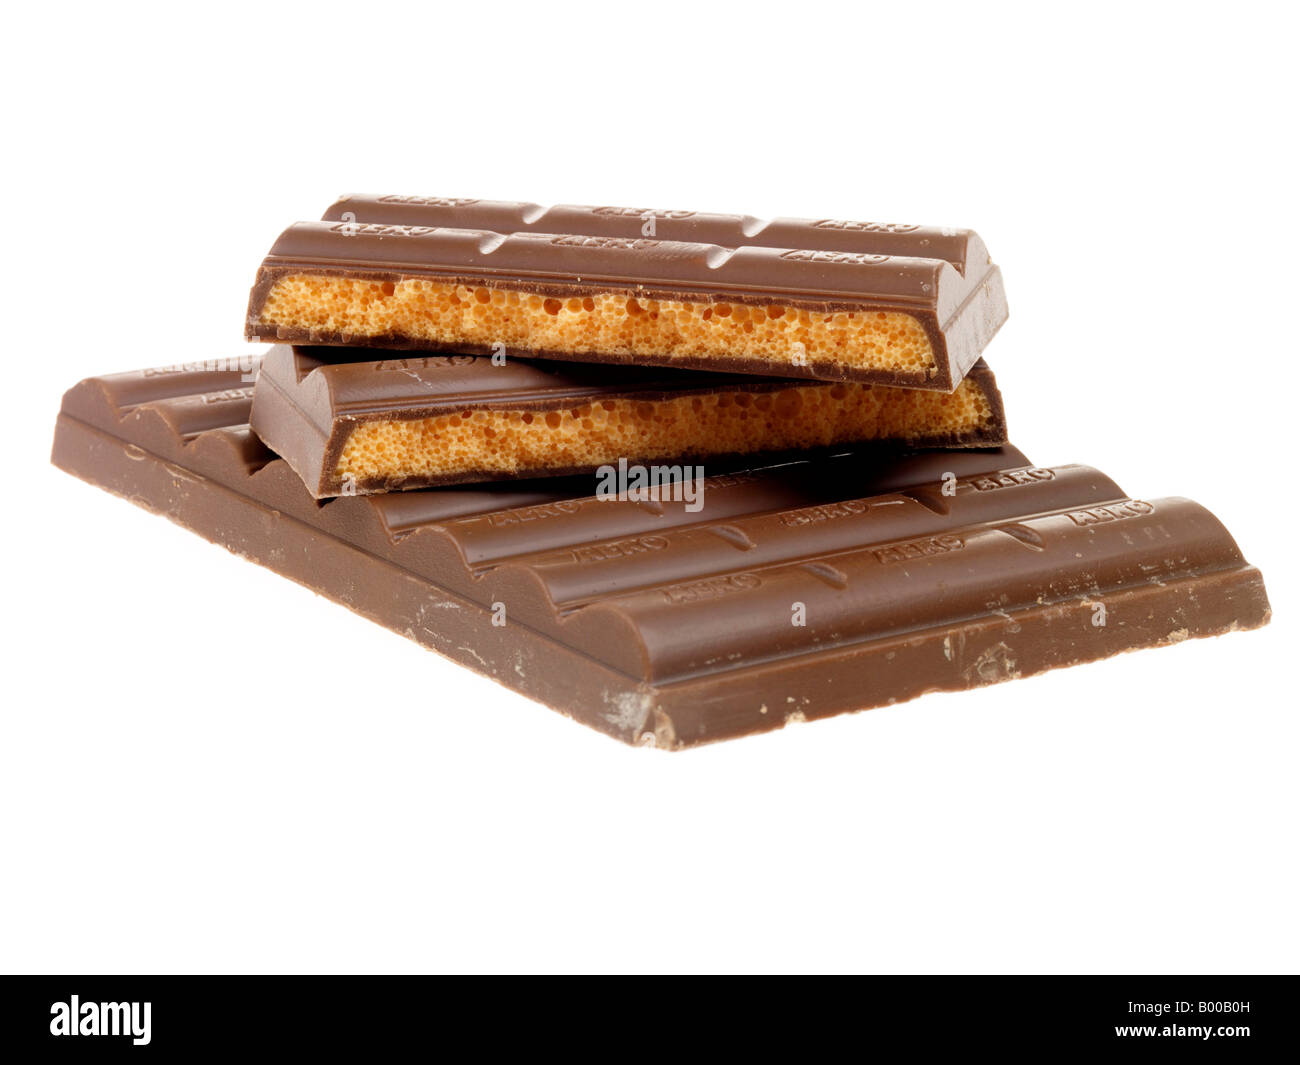 Stack Or Pile Of Orange Chocolate Aero Confectionery Or Sweets Against A White Background With Copy Space Or A Clipping Path With No People Stock Photo